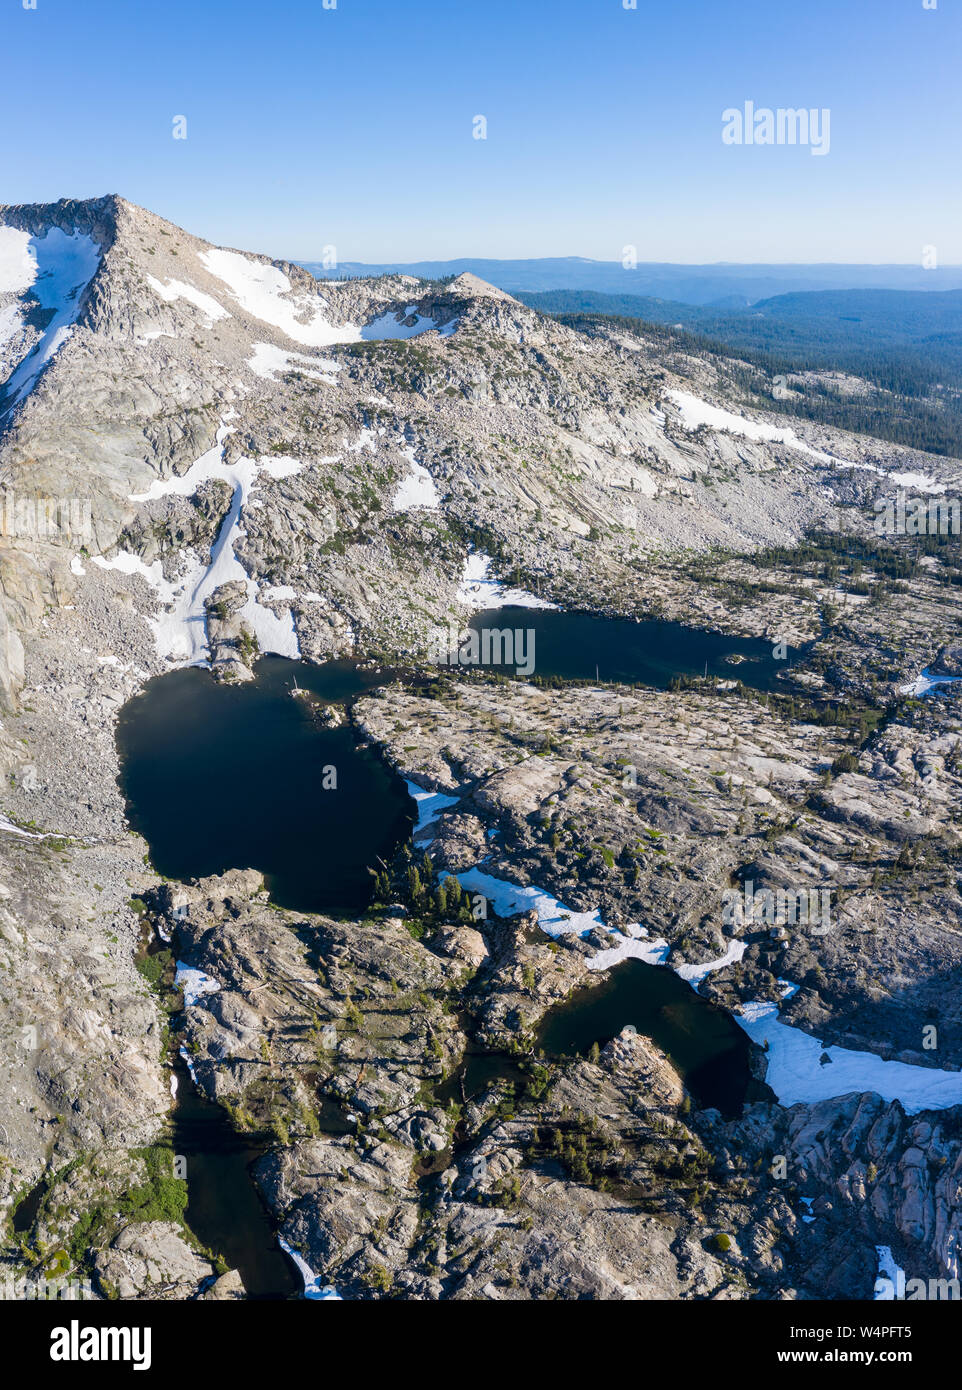 High granite mountains surround beautiful lakes in the Desolation Wilderness, California. This mountainous area is a popular backpacking destination. Stock Photo